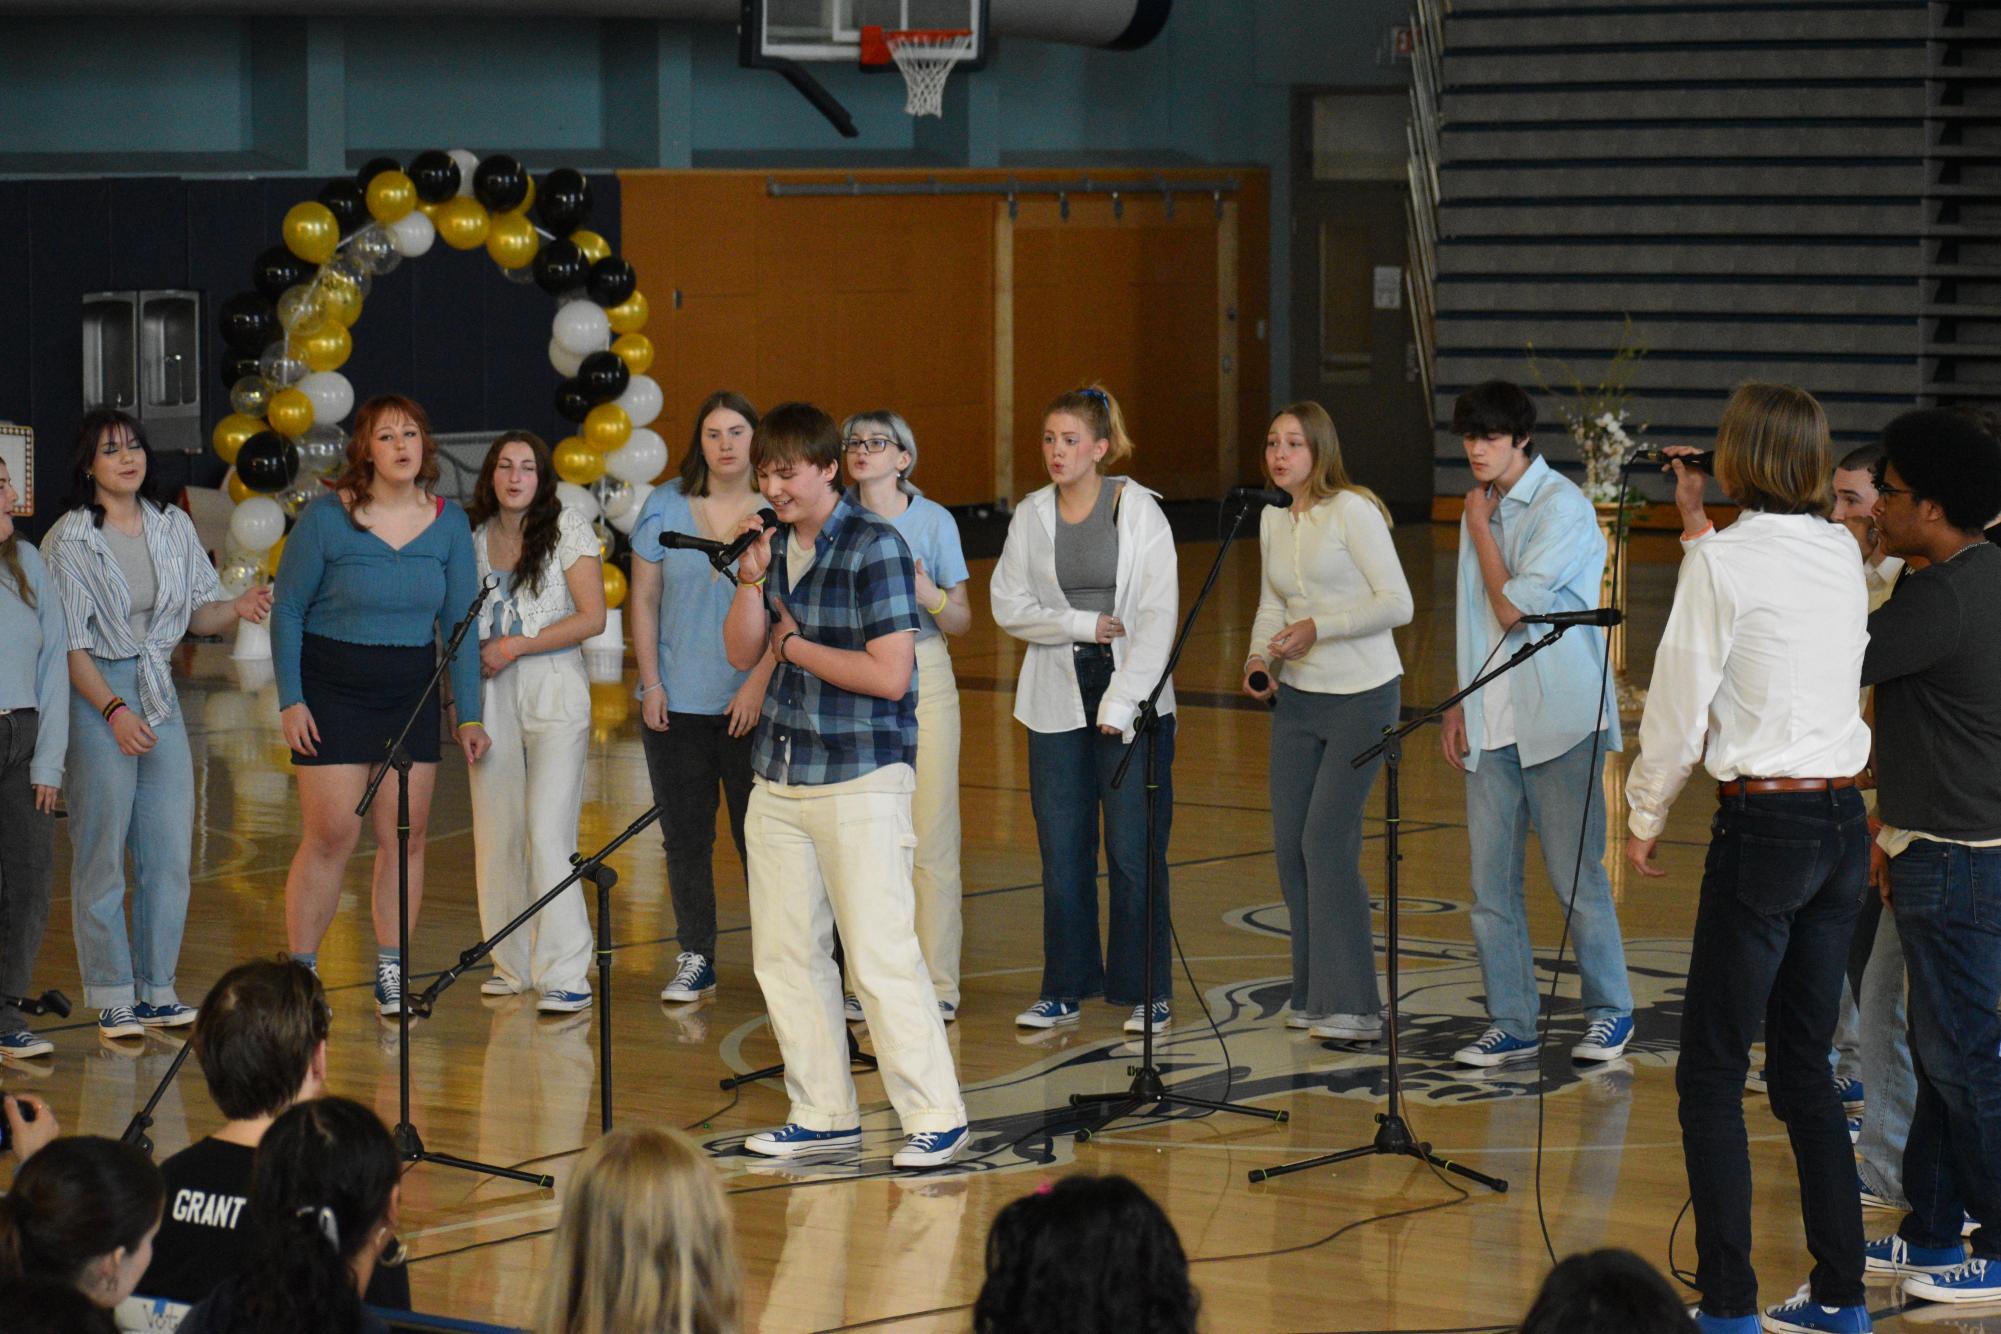 Wilsonville Highs a capella group, Sould Out performed two songs at the Springfest Assembly. Those two were Valerie and Hand of God.